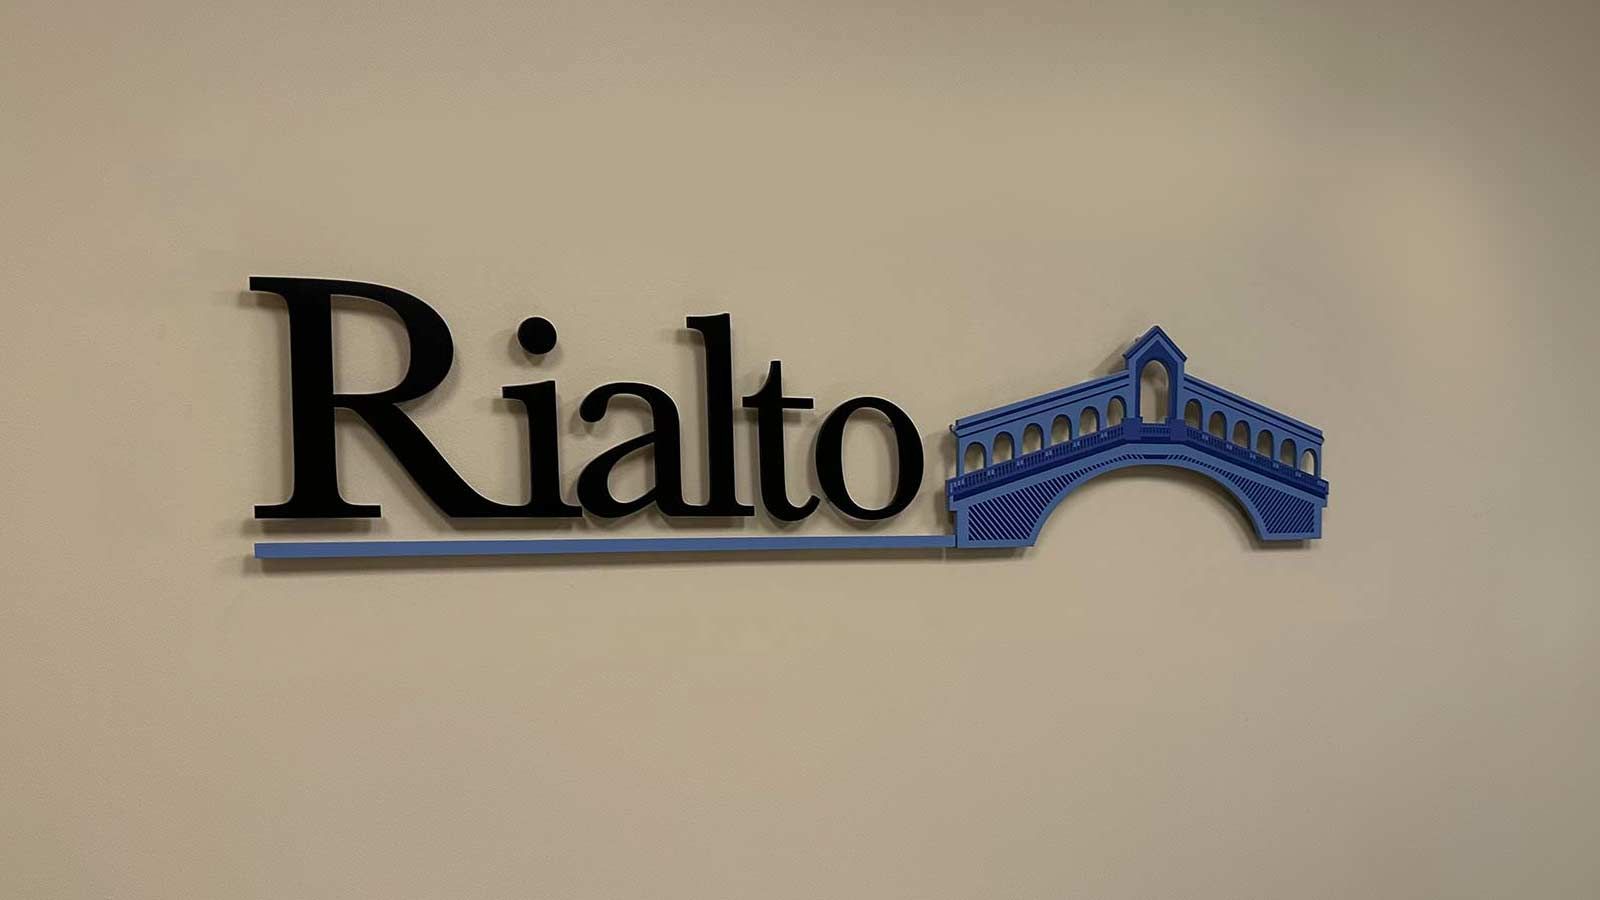 Rialto aluminum sign attached to the wall